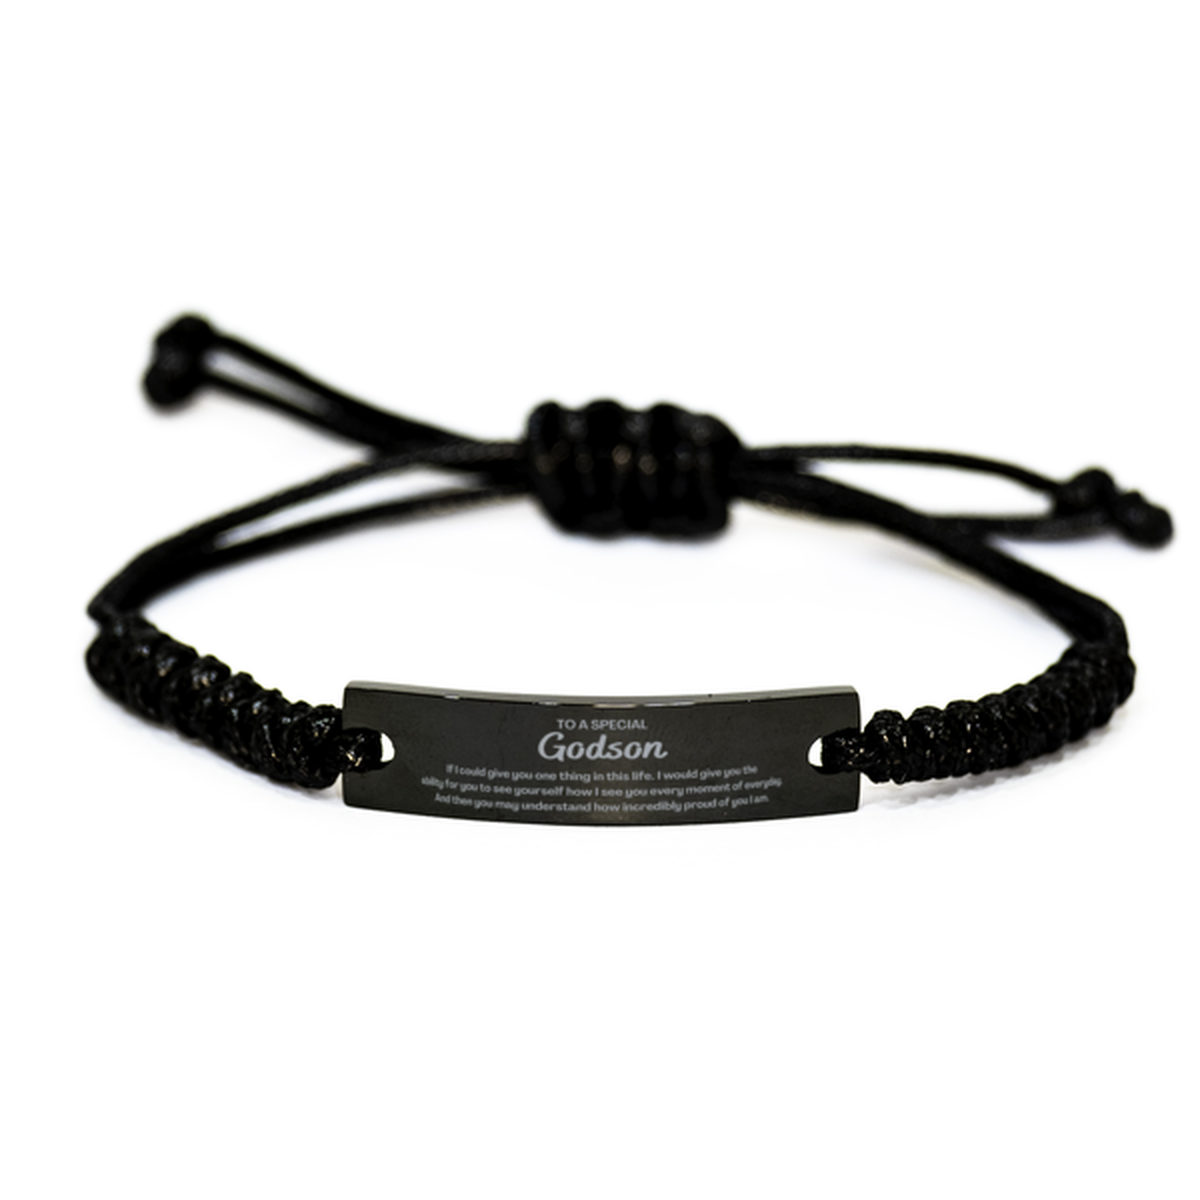 To My Godson Black Rope Bracelet, Gifts For Godson Engraved, Inspirational Gifts for Christmas Birthday, Epic Gifts for Godson To A Special Godson how incredibly proud of you I am